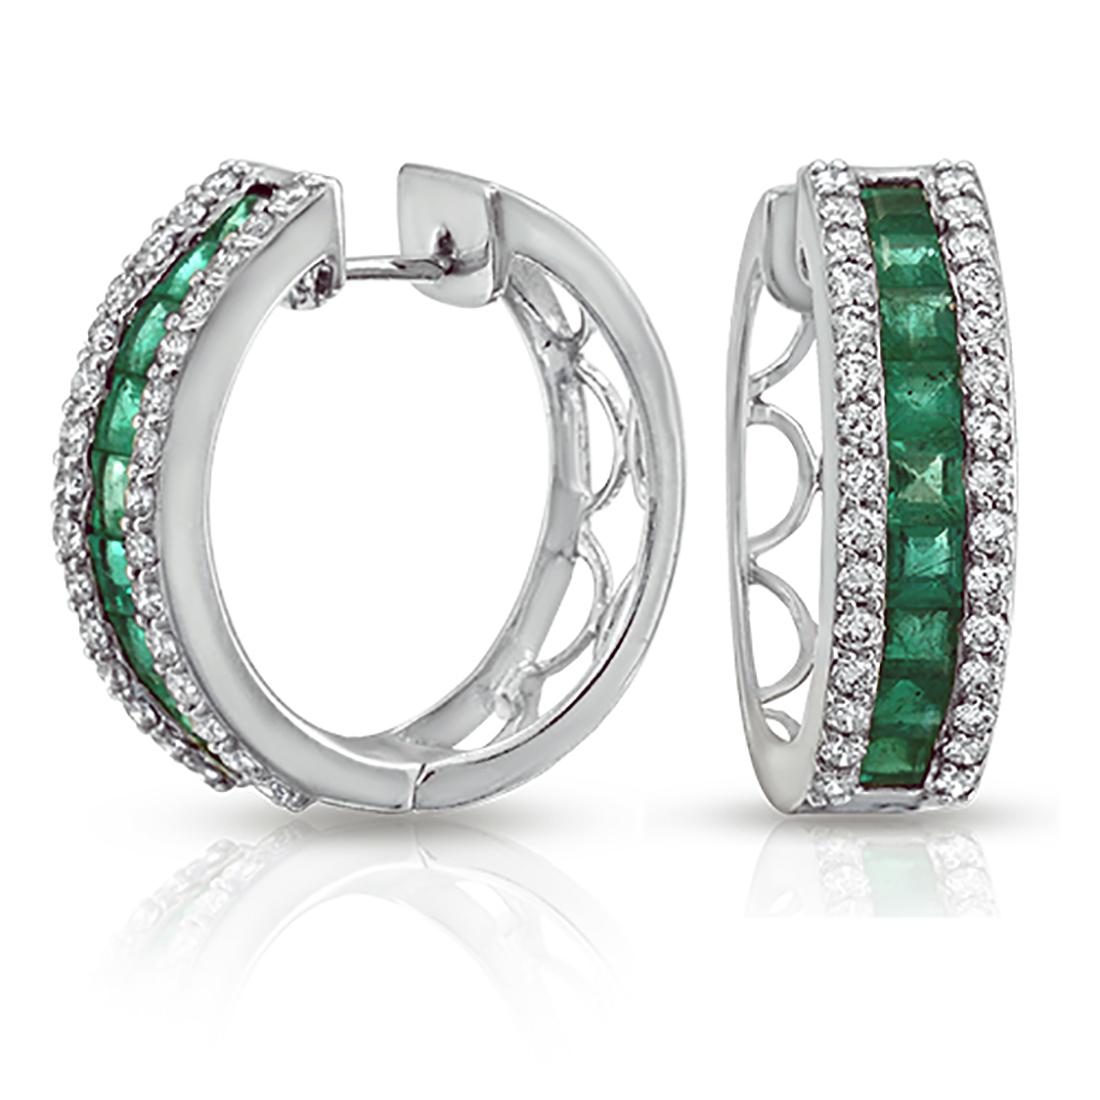 100% Authentic, 100% Customer Satisfaction

Height: 20 mm

Width: 6 mm

Metal:14K White Gold

Hallmarks: 14K

Total Weight: 5.6 Grams

Stone Type: 0.98 CT Natural Emerald & G VS1 0.34 CT Diamonds

Condition: New

Estimated Price: $2700

Stock